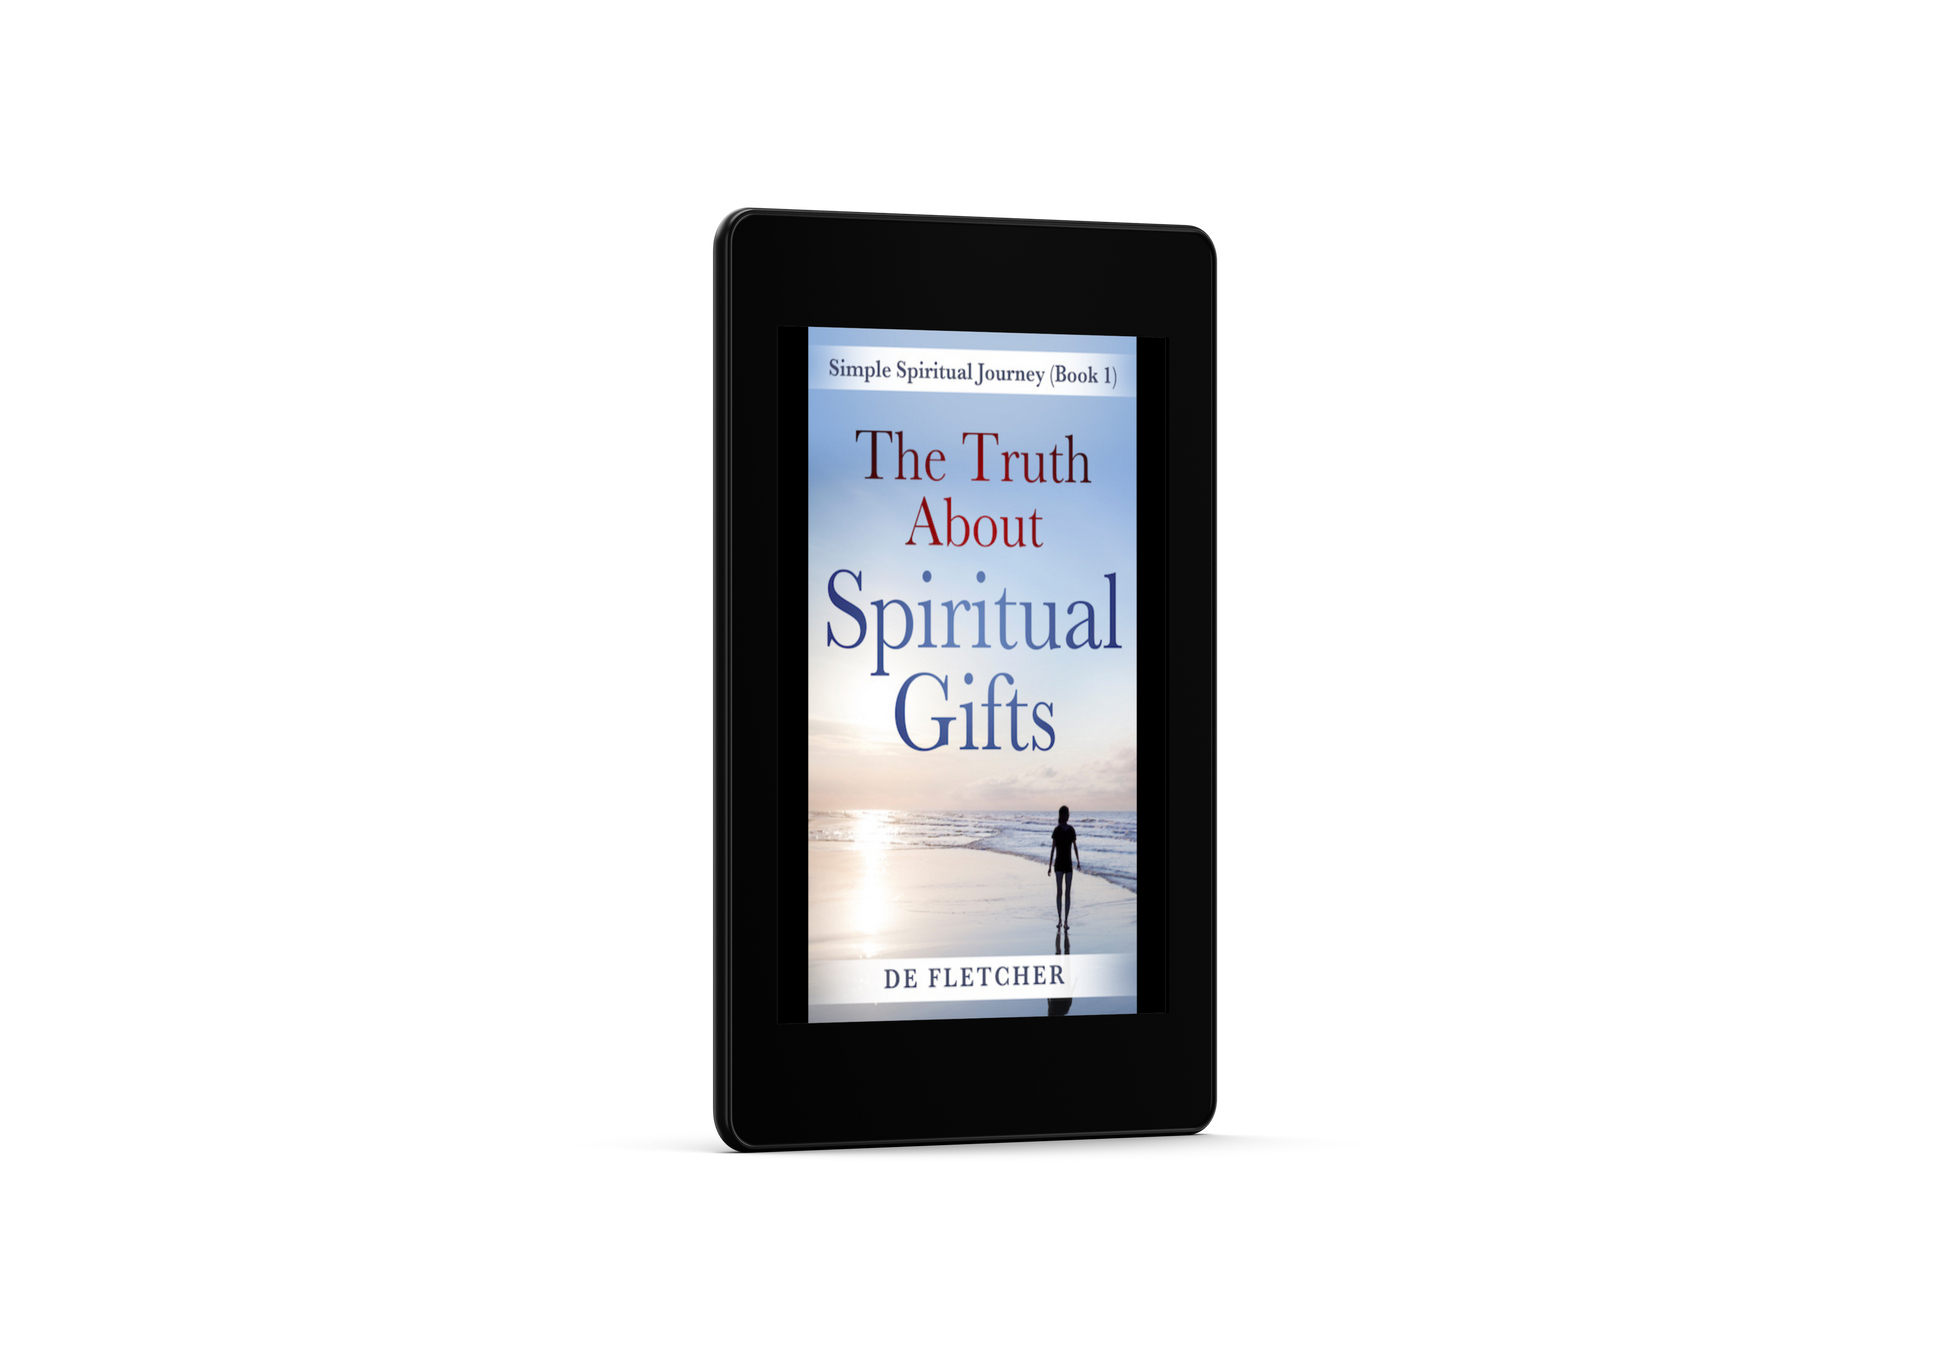 An Ebook photo of The Truth About Spiritual Gifts". Woman walking along the beach at sunset.